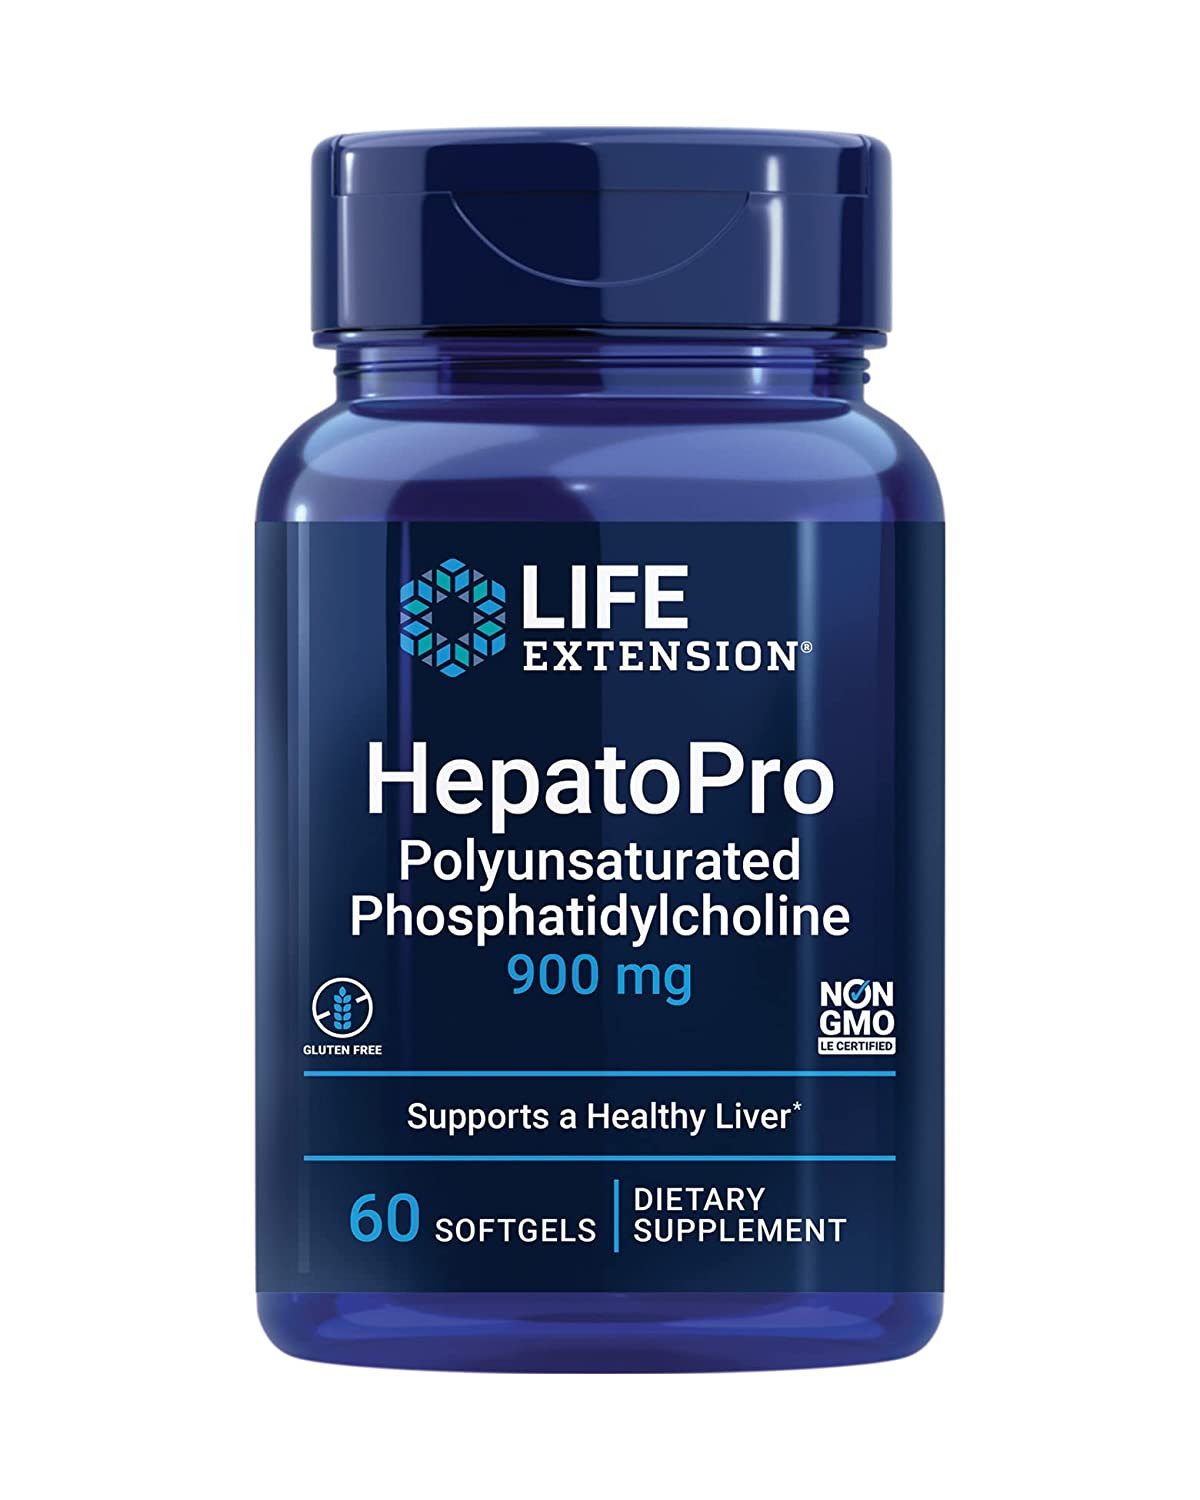 Life Extension HepatoPro Polyunsaturated Phosphatidylcholine - Phosphatidylcholine PPC Supplement Pills for Liver Health Support and Detox – Non-GMO, Gluten-Free – 60 Softgels